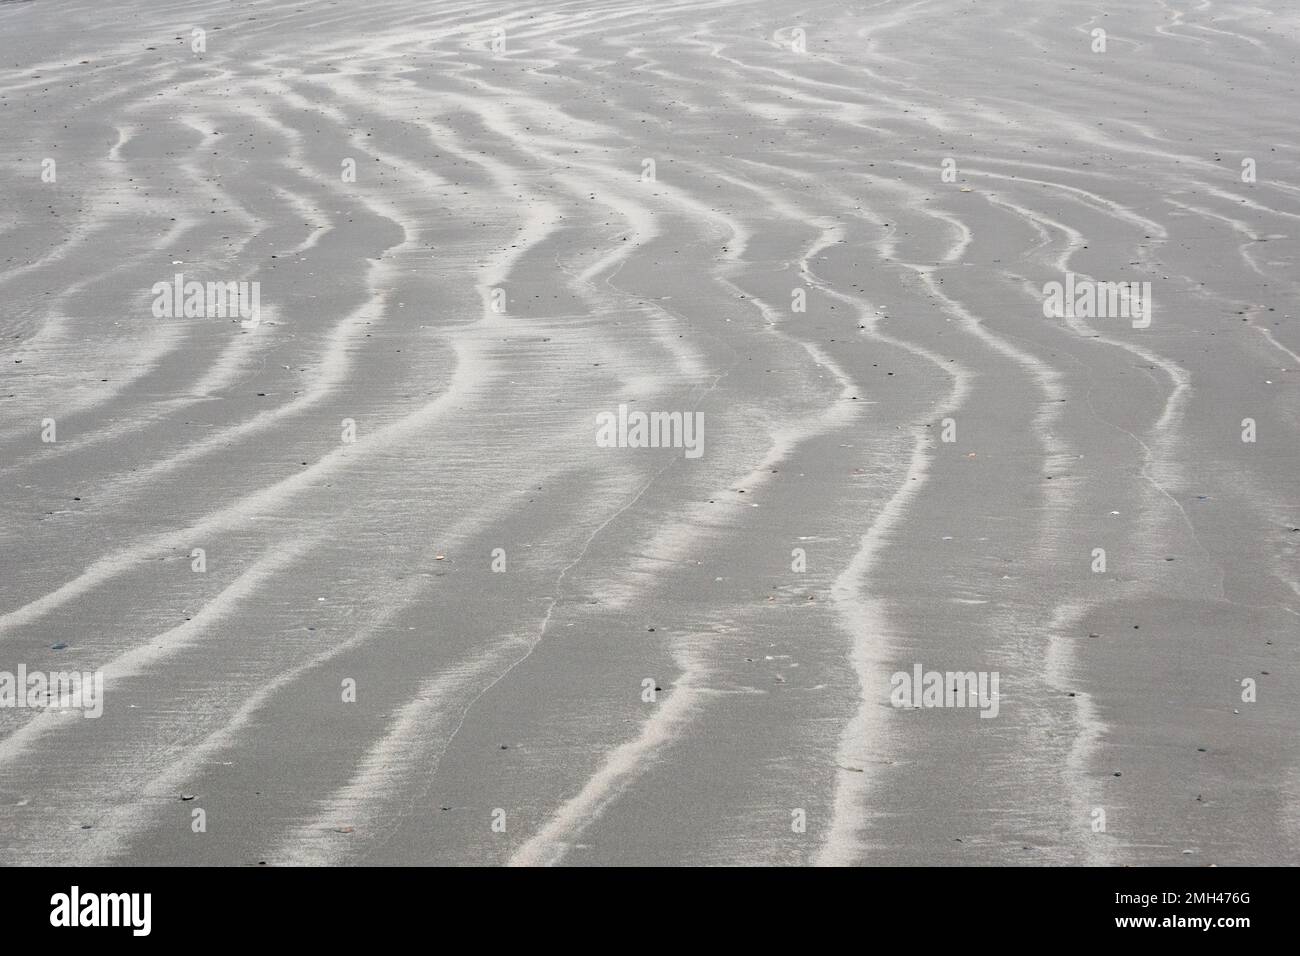 Beach, wavy pattern of sand and white material, consisting of small fragments of shells Stock Photo